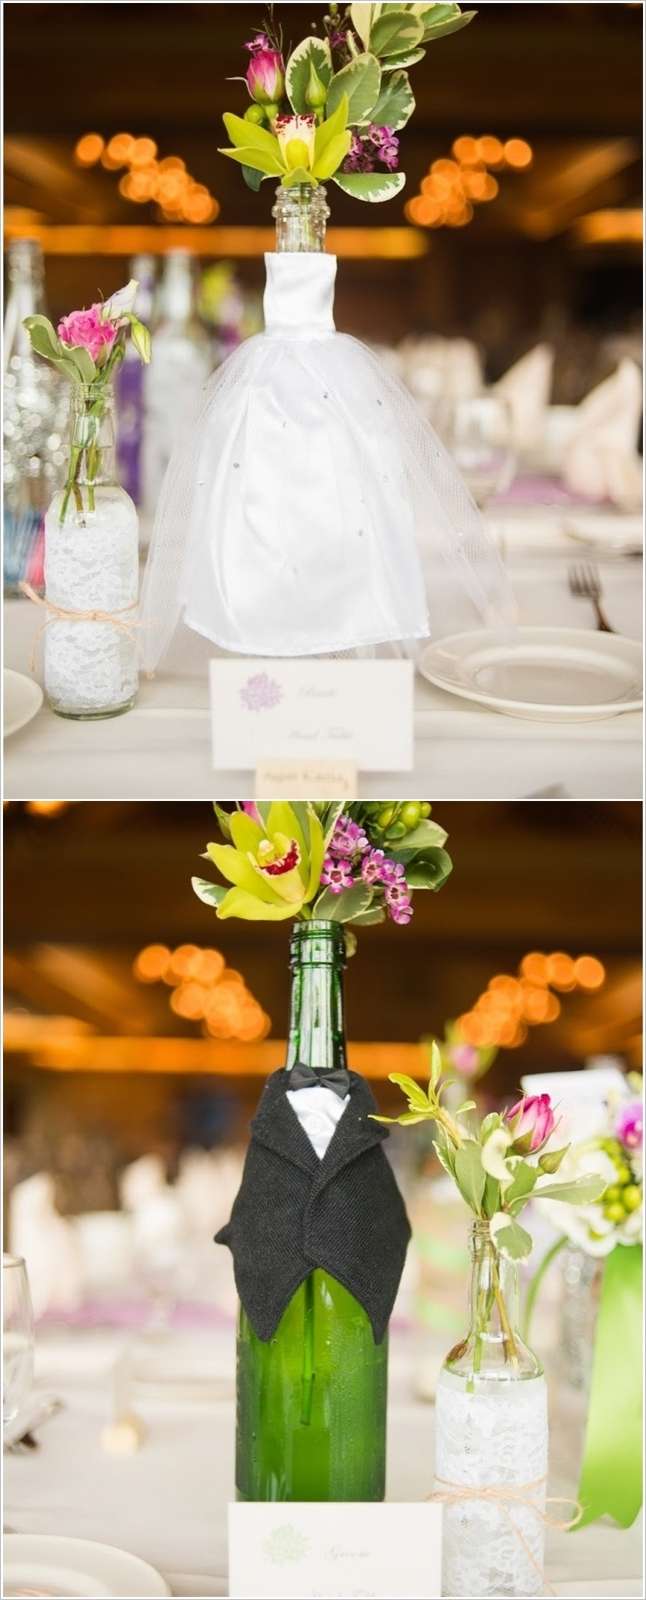 5 Creative Wine Bottle Centerpiece Ideas For Parties And